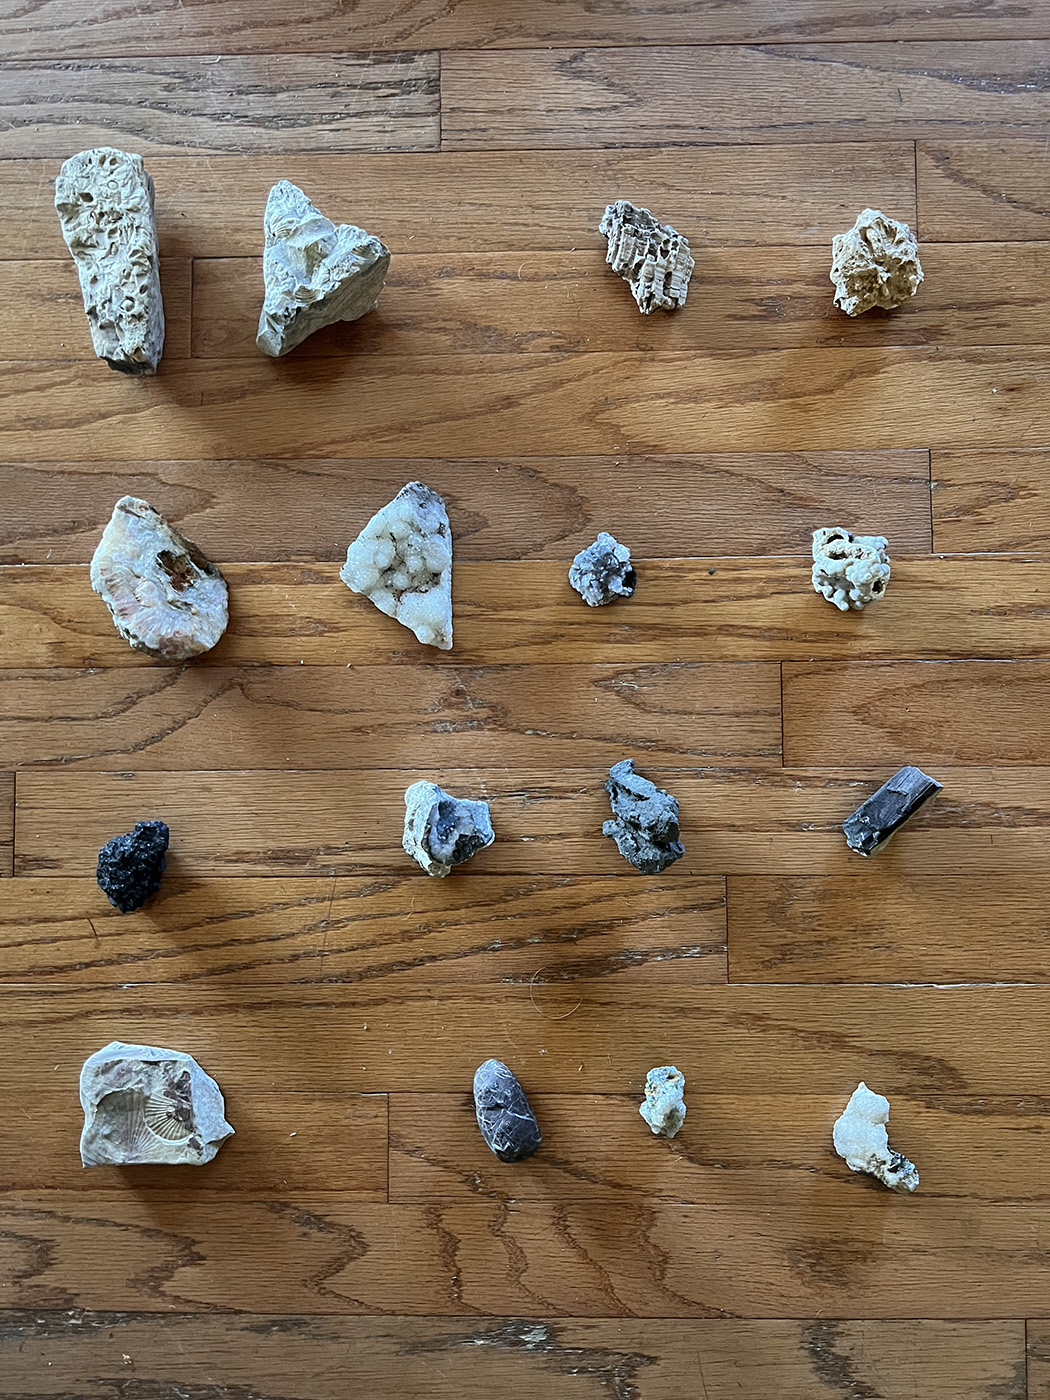  from the (What You Carry) Series (Internal Spaces), 2022 Found Objects: 4x coral (Seychelles) Granite (Germany), granite (Germany), crystal (Missouri rivers), tile (Germany river) 3x Oyster (VA, FL, NC), fan coral (NC) coral (Seychelles), shell (Denmark), quartzite (Missouri), coral (Seychelles) 